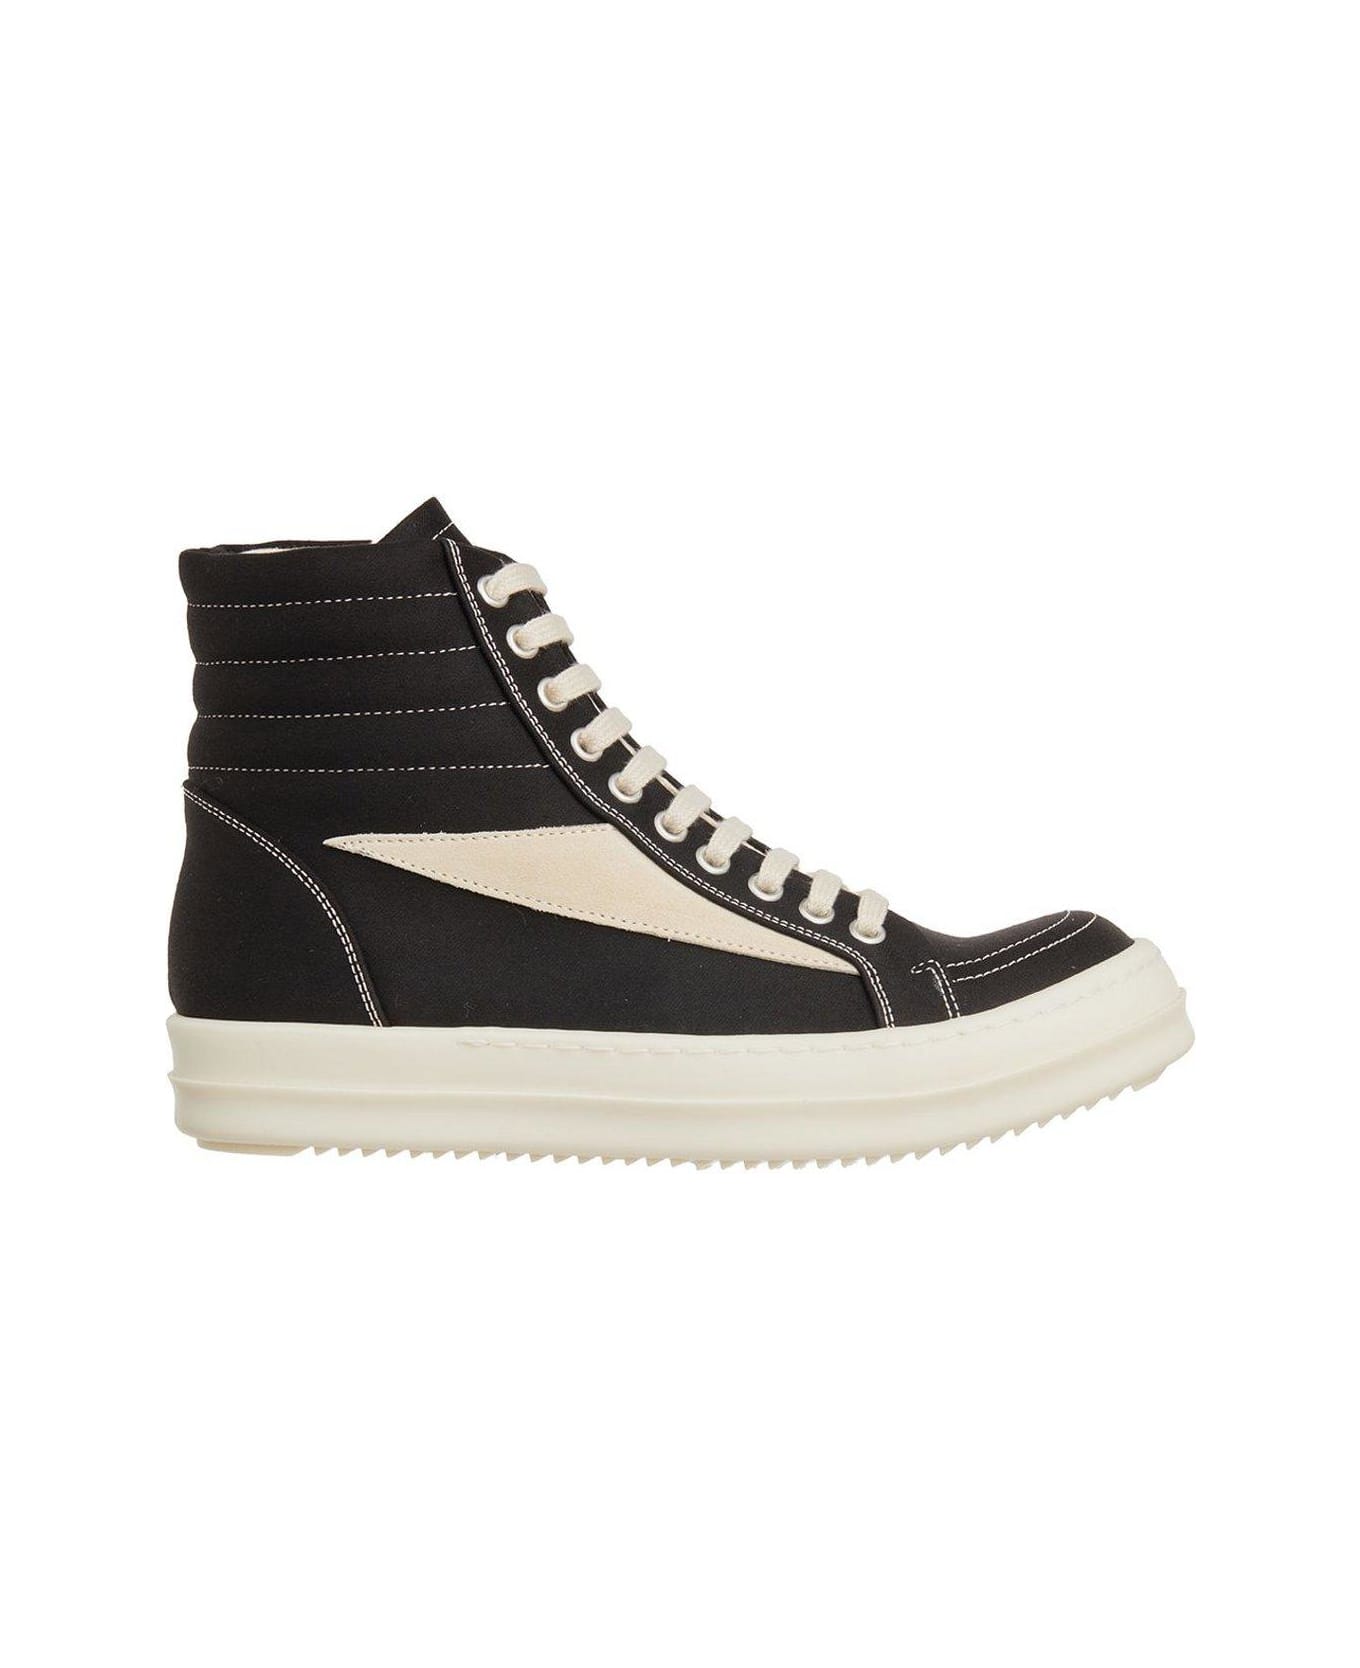 DRKSHDW High-top Lace-up Sneakers - Black